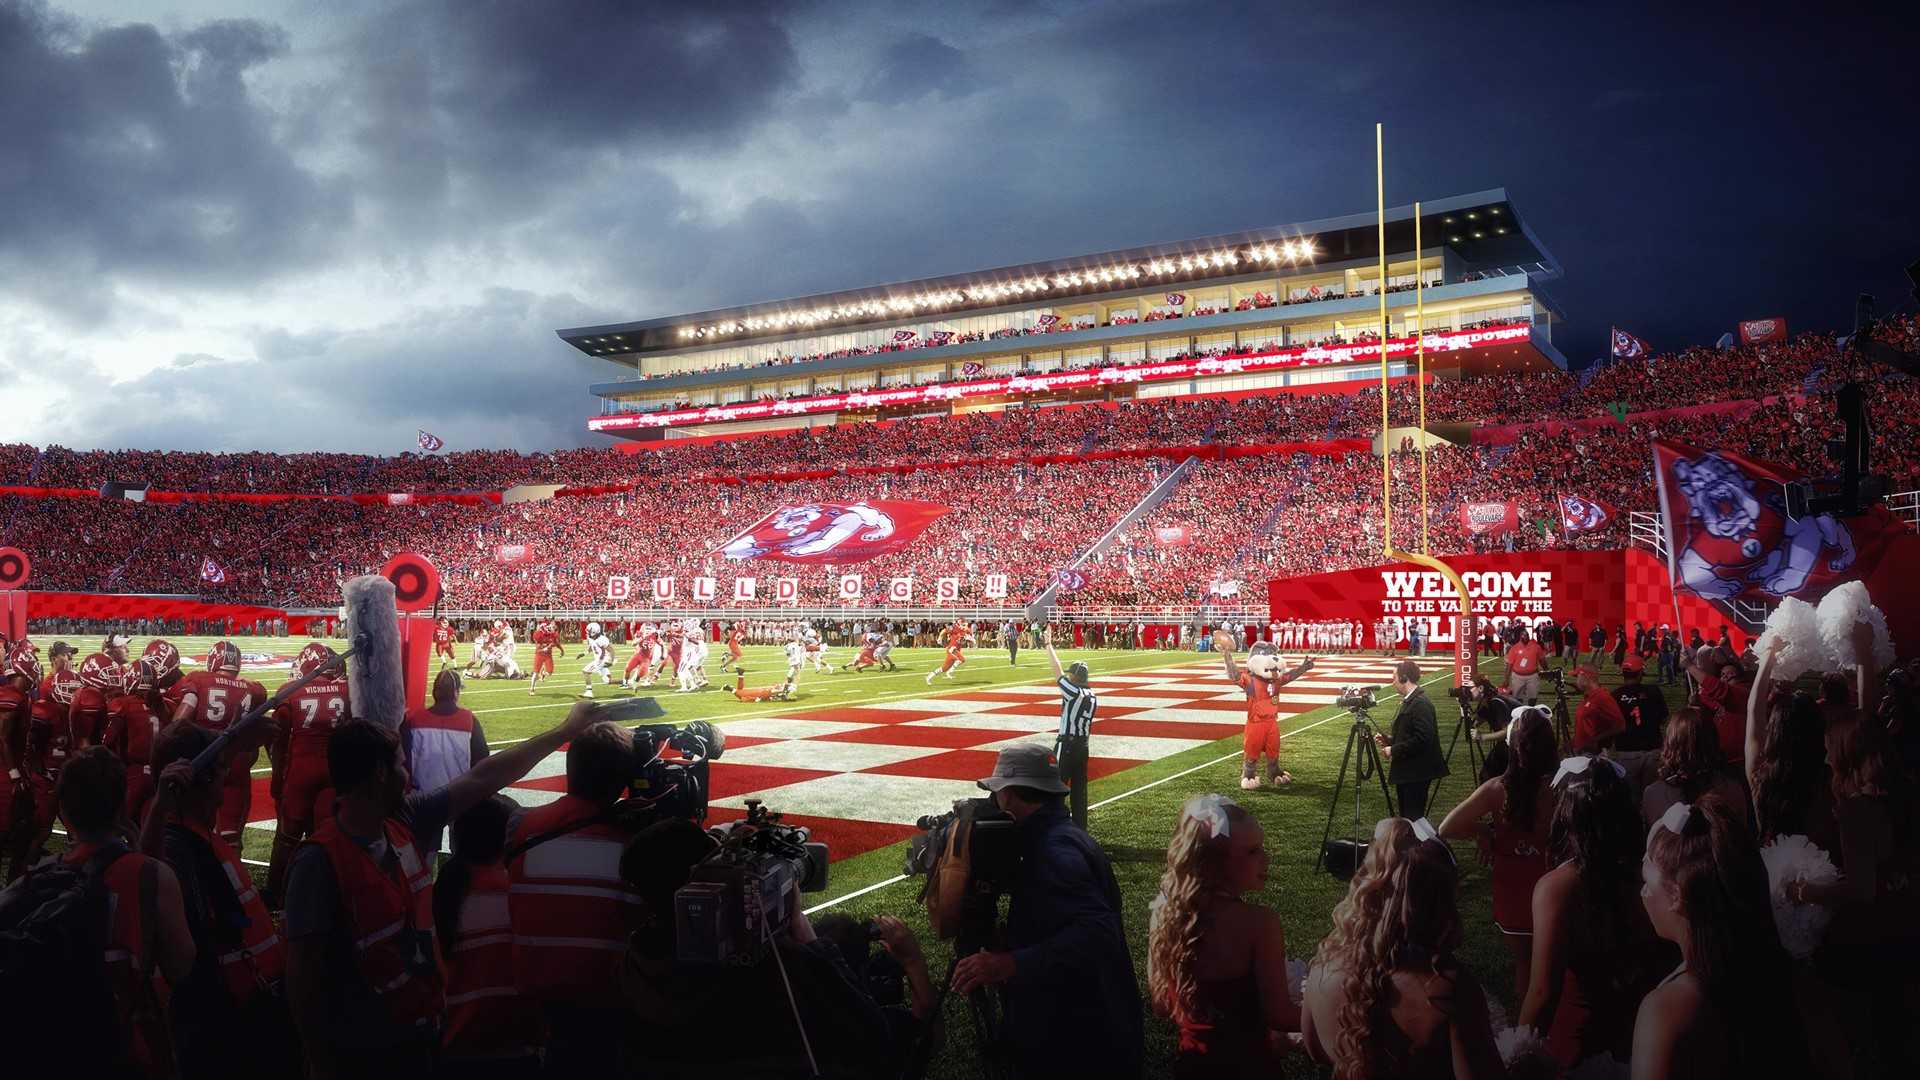 The planned renderings of the $60 million renovation project of Bulldog Stadium in Fresno, California to be completed in 2019. (Courtesy of Fresno State Athletics)